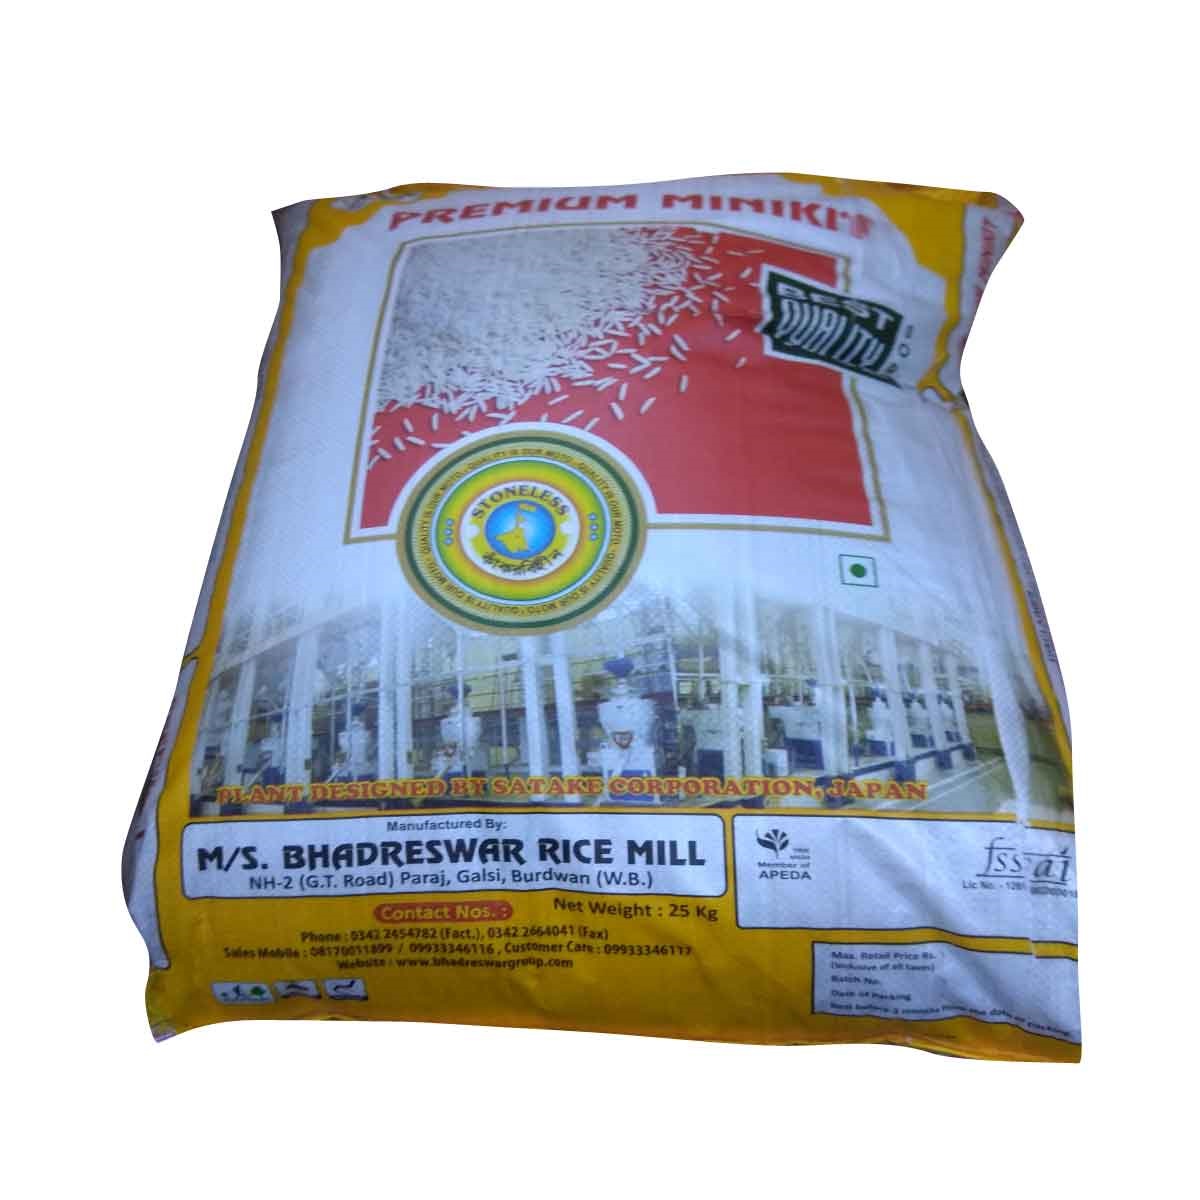 MINIKET RICE SPECIAL ( LALBABA GROUP ) - 26 KG